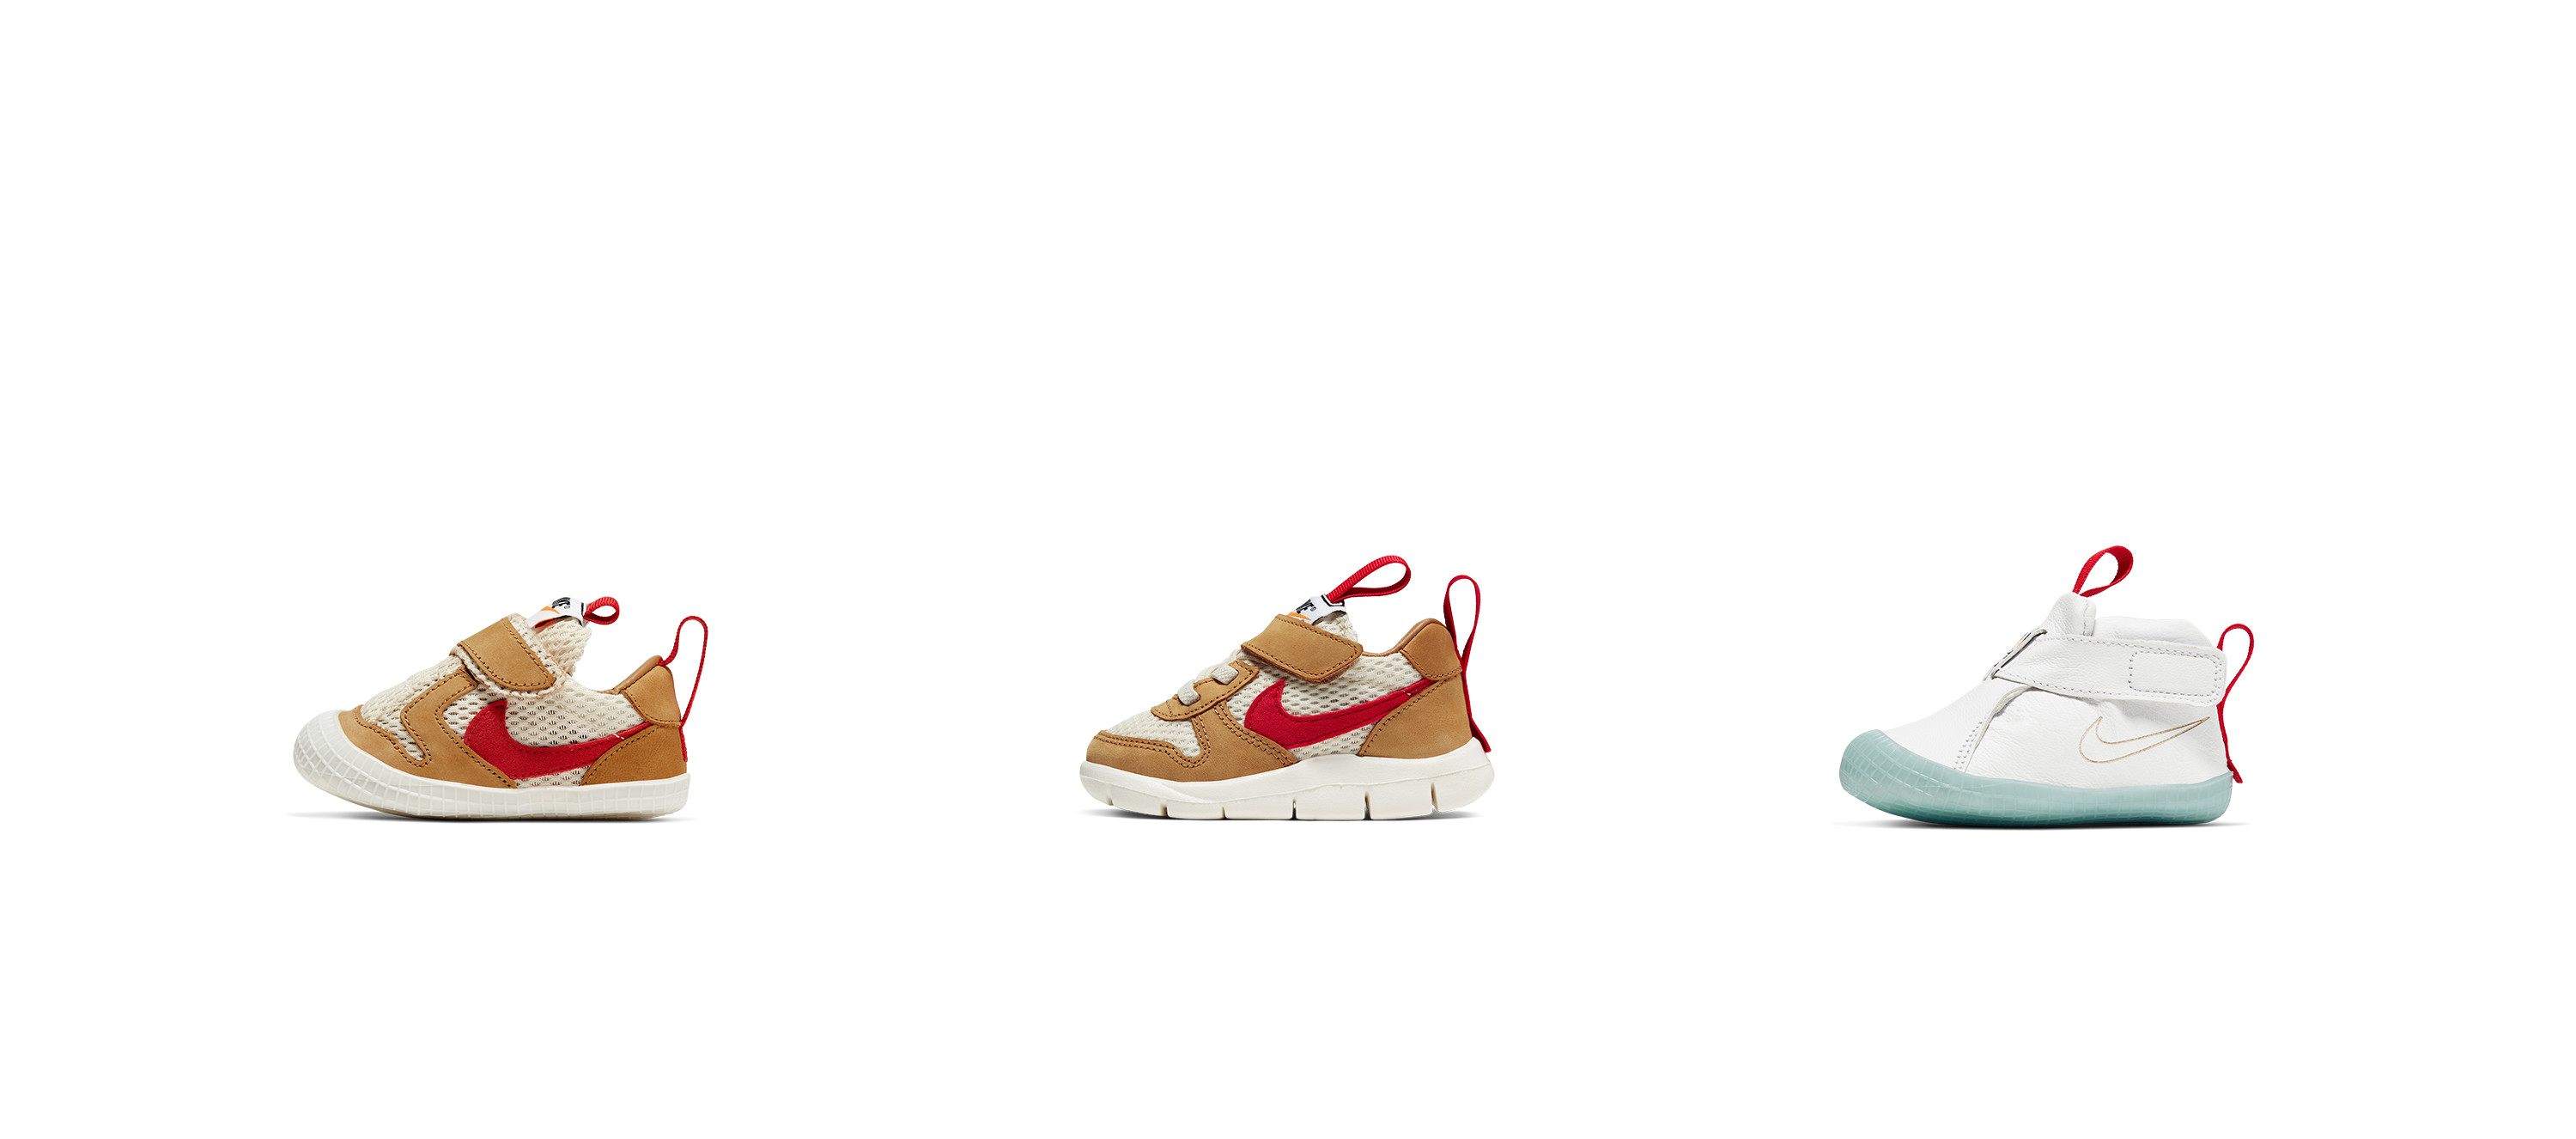 Leaked: Is This the Next Tom Sachs x Nike Mars Yard Collaboration? -  Sneaker Freaker